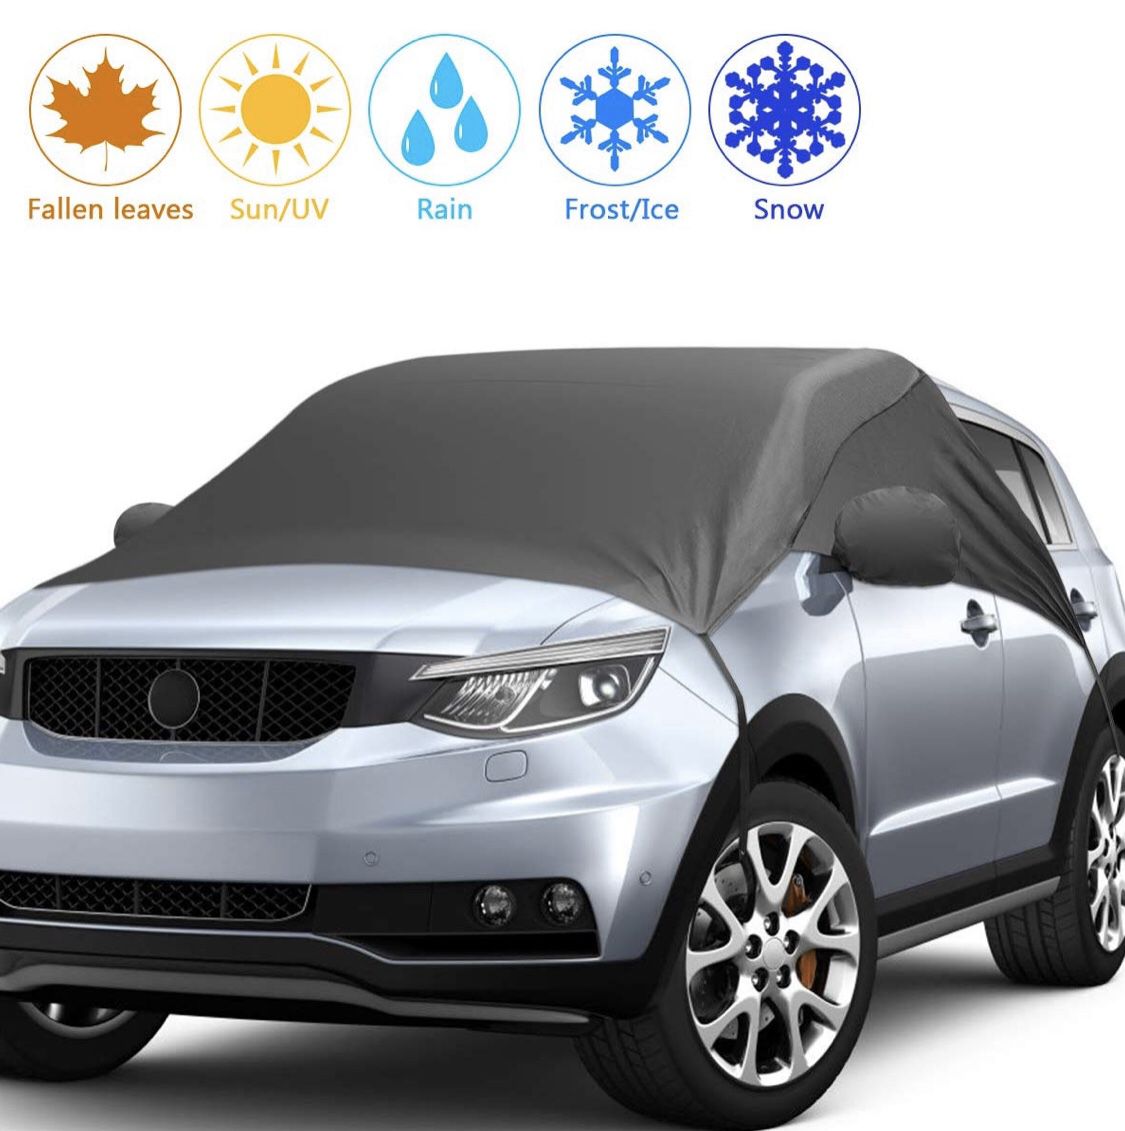 2019 Upgrade Version Car Windshield Snow Cover, Snow Ice Frost UV Cover for Car Front and Side Windshield & Rearview Mirror, Waterproof Car Snow Cove